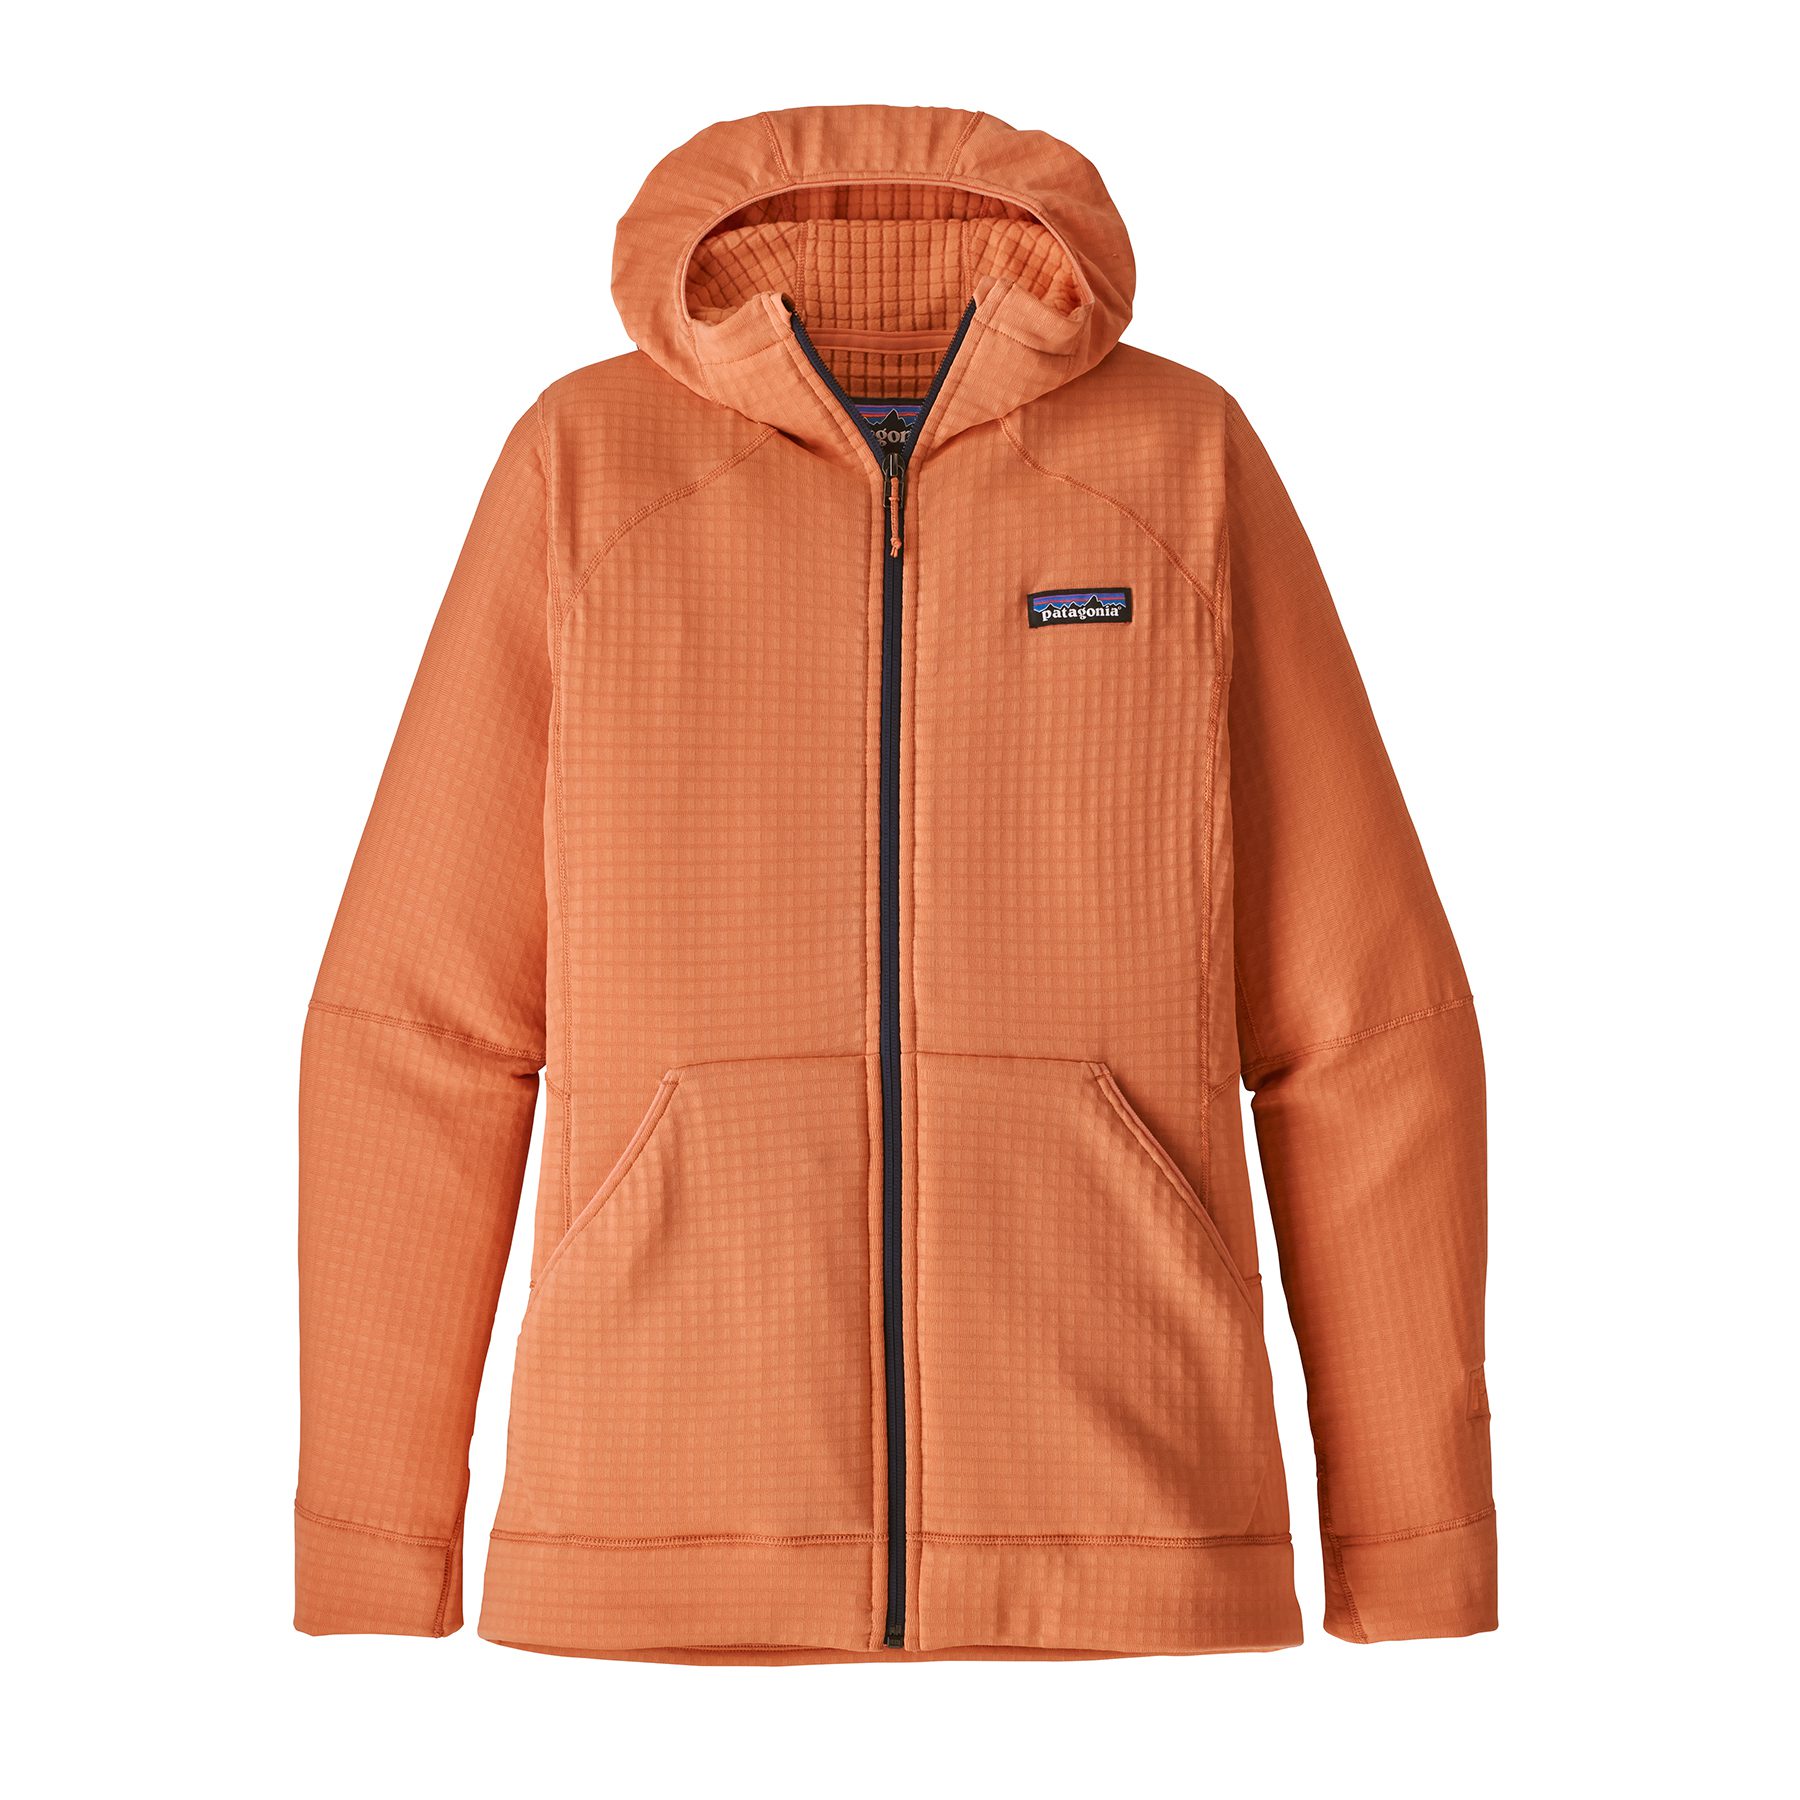 Patagonia's R1 Turns 20 and Has Fresh New Look - Gripped Magazine